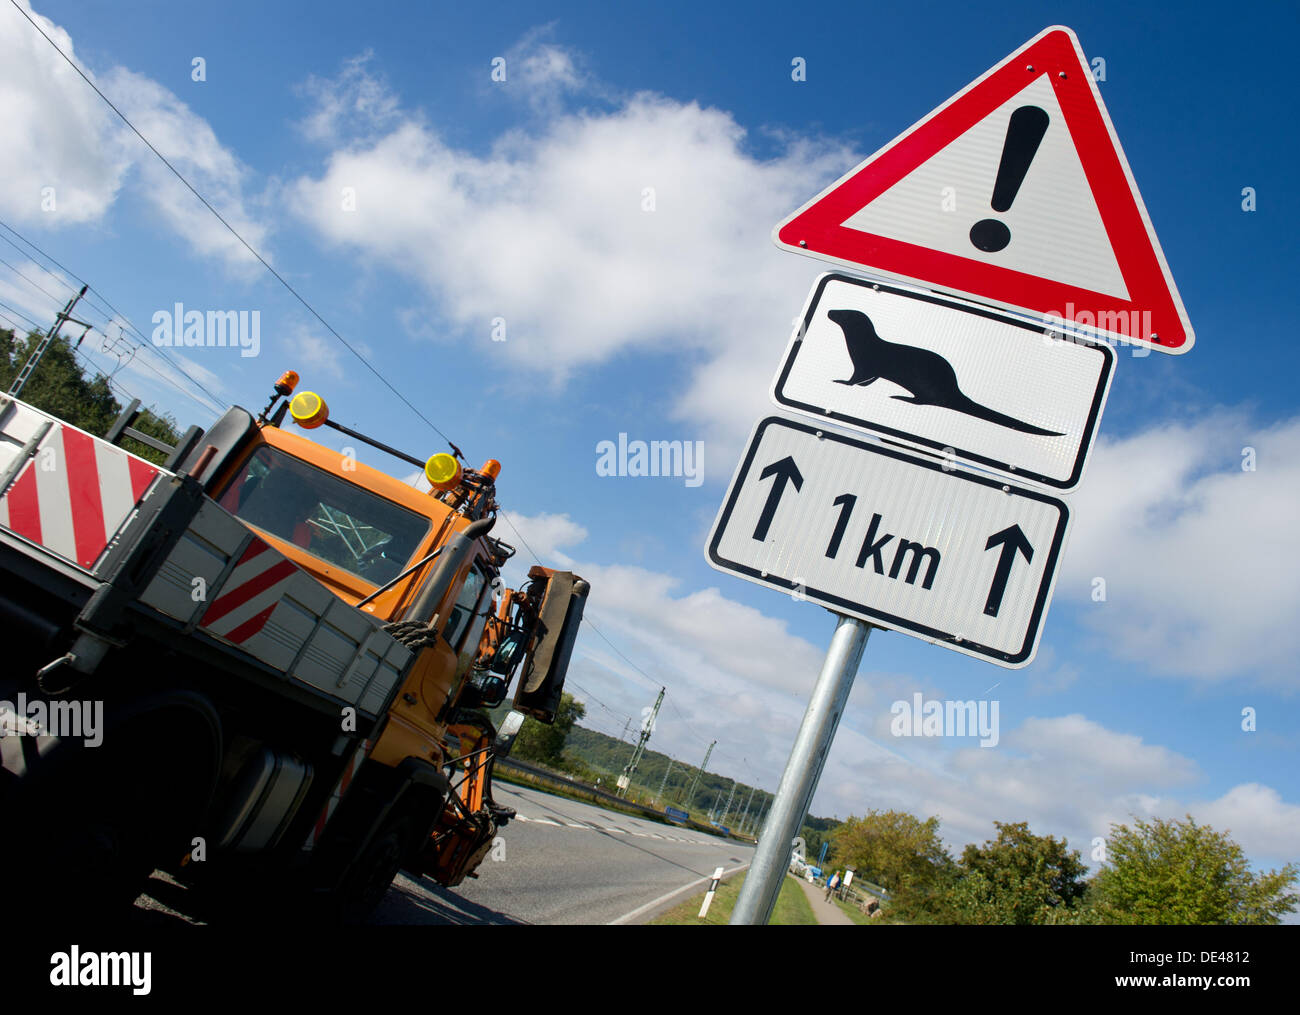 Lietzow, Germany. 11th Sep, 2013. A road sign indicates a warning for crossing otters on a country lane on the island of Ruegen near Lietzow, Germany, 11 September 2013. Photo: Stefan Sauer/dpa/Alamy Live News Stock Photo